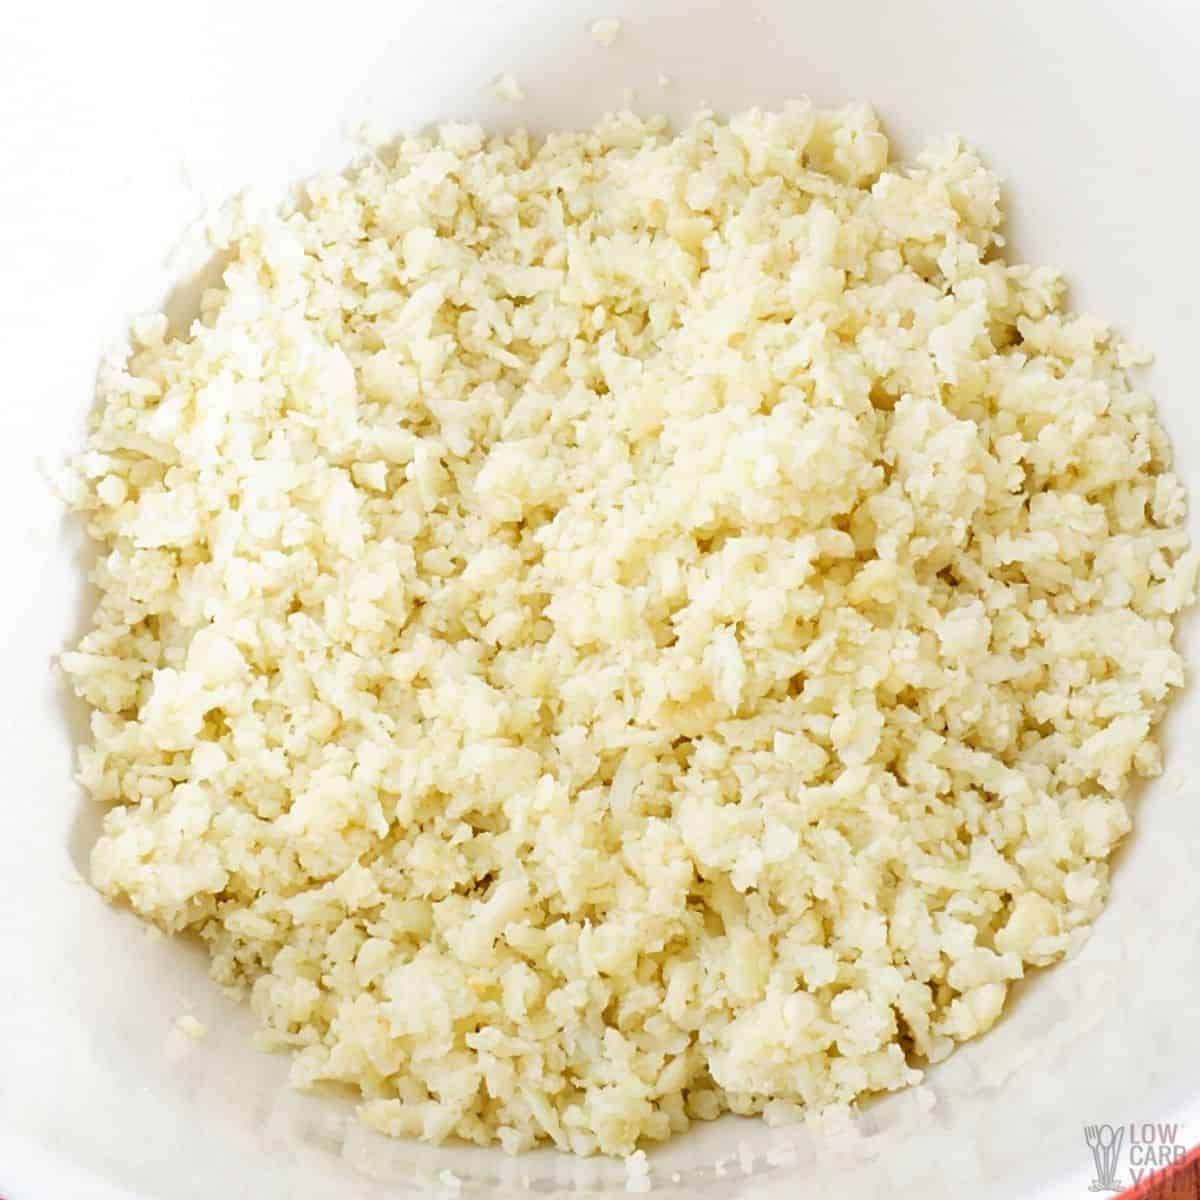 strained cauliflower rice in white mixing bowl.